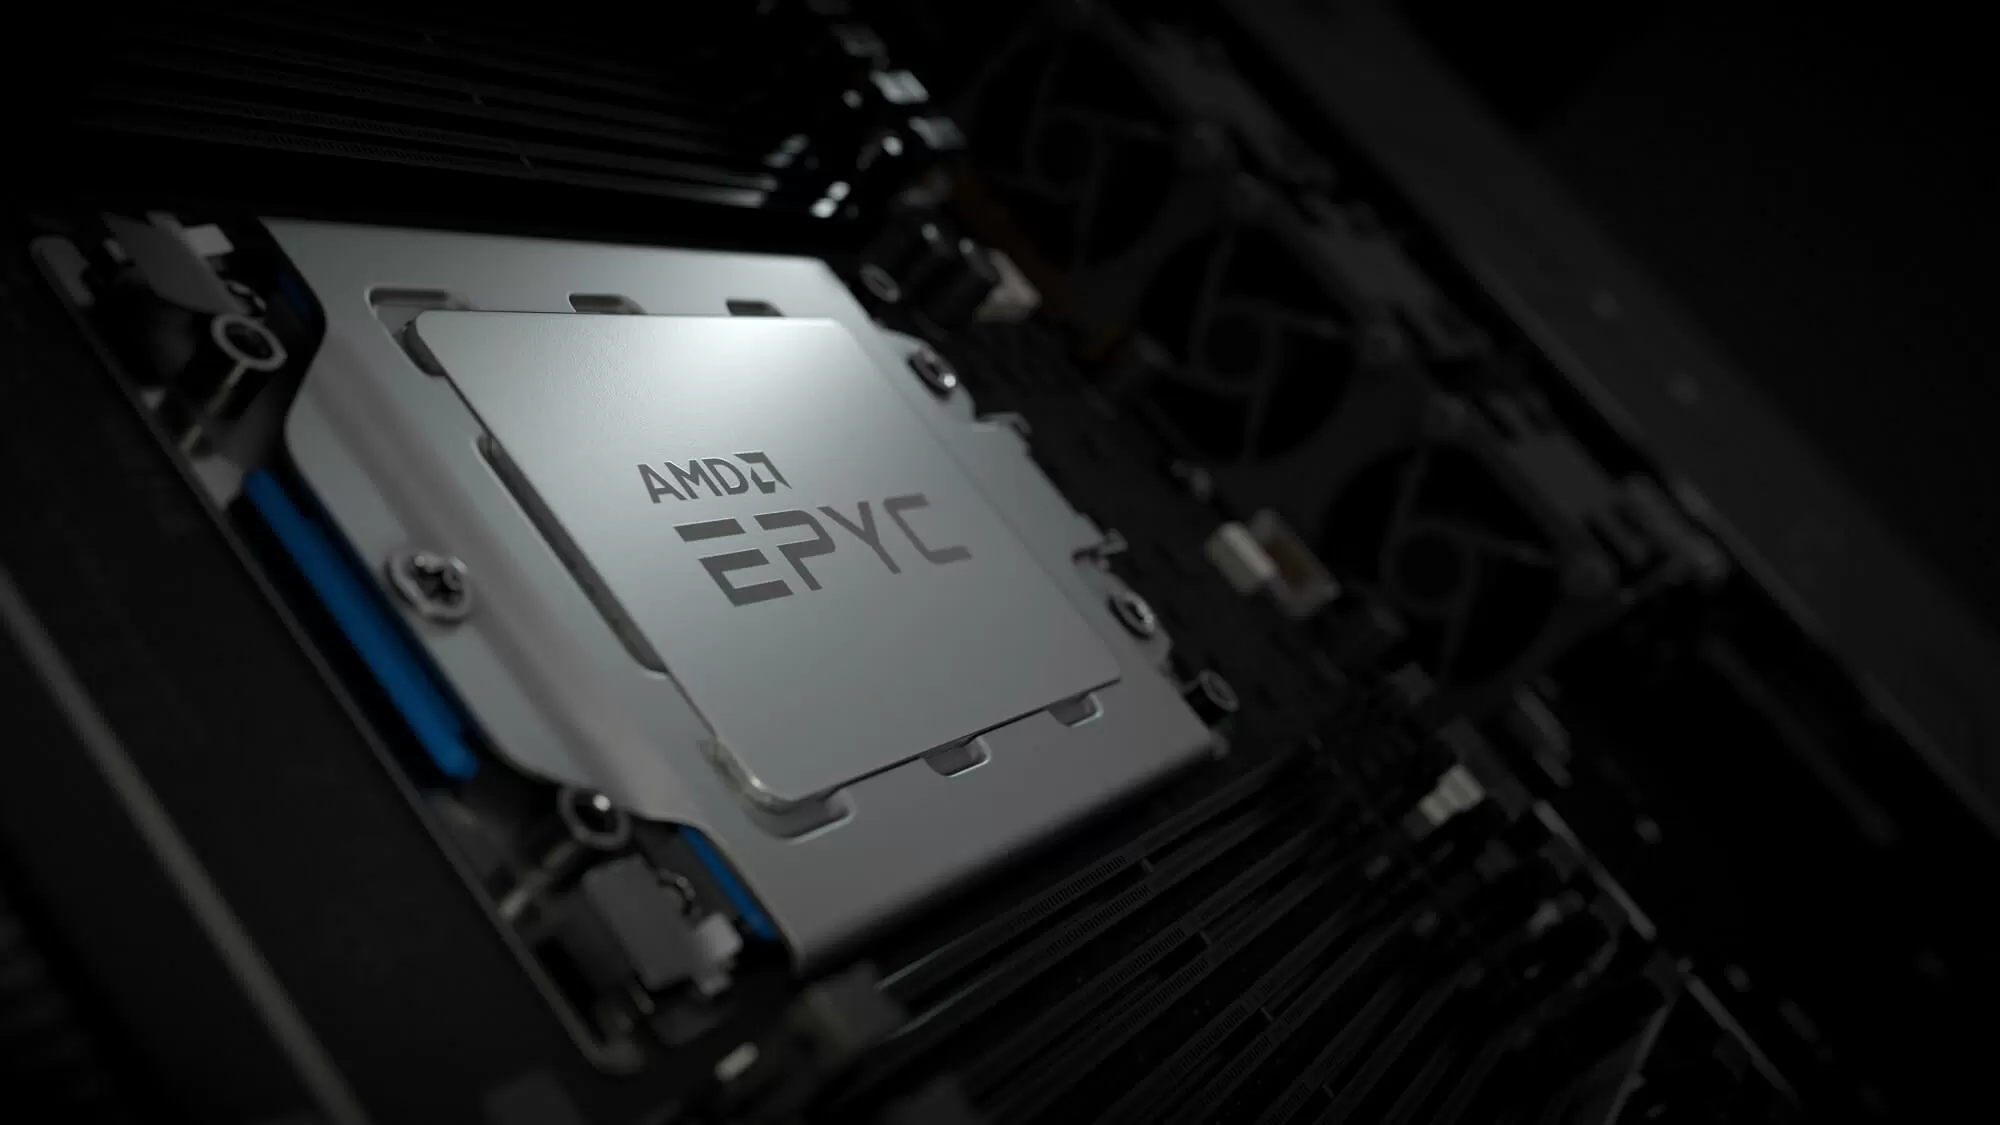 AMD's Epyc Rome CPU performs real-time 8K HEVC encoding